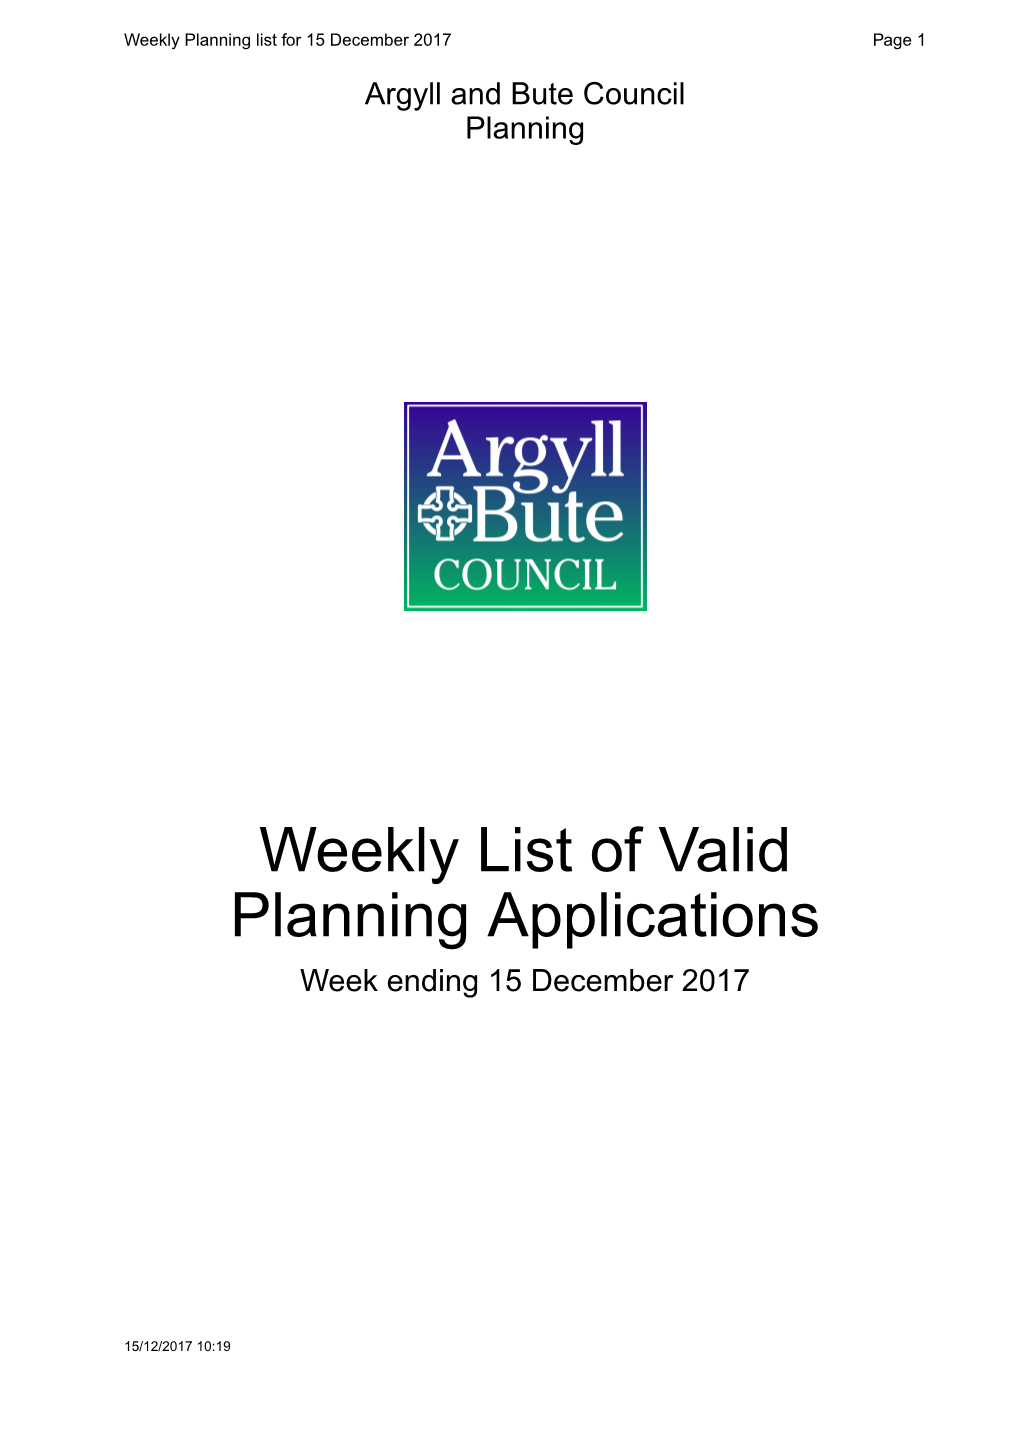 Weekly List of Valid Planning Applications 15Th December 2017.Pdf